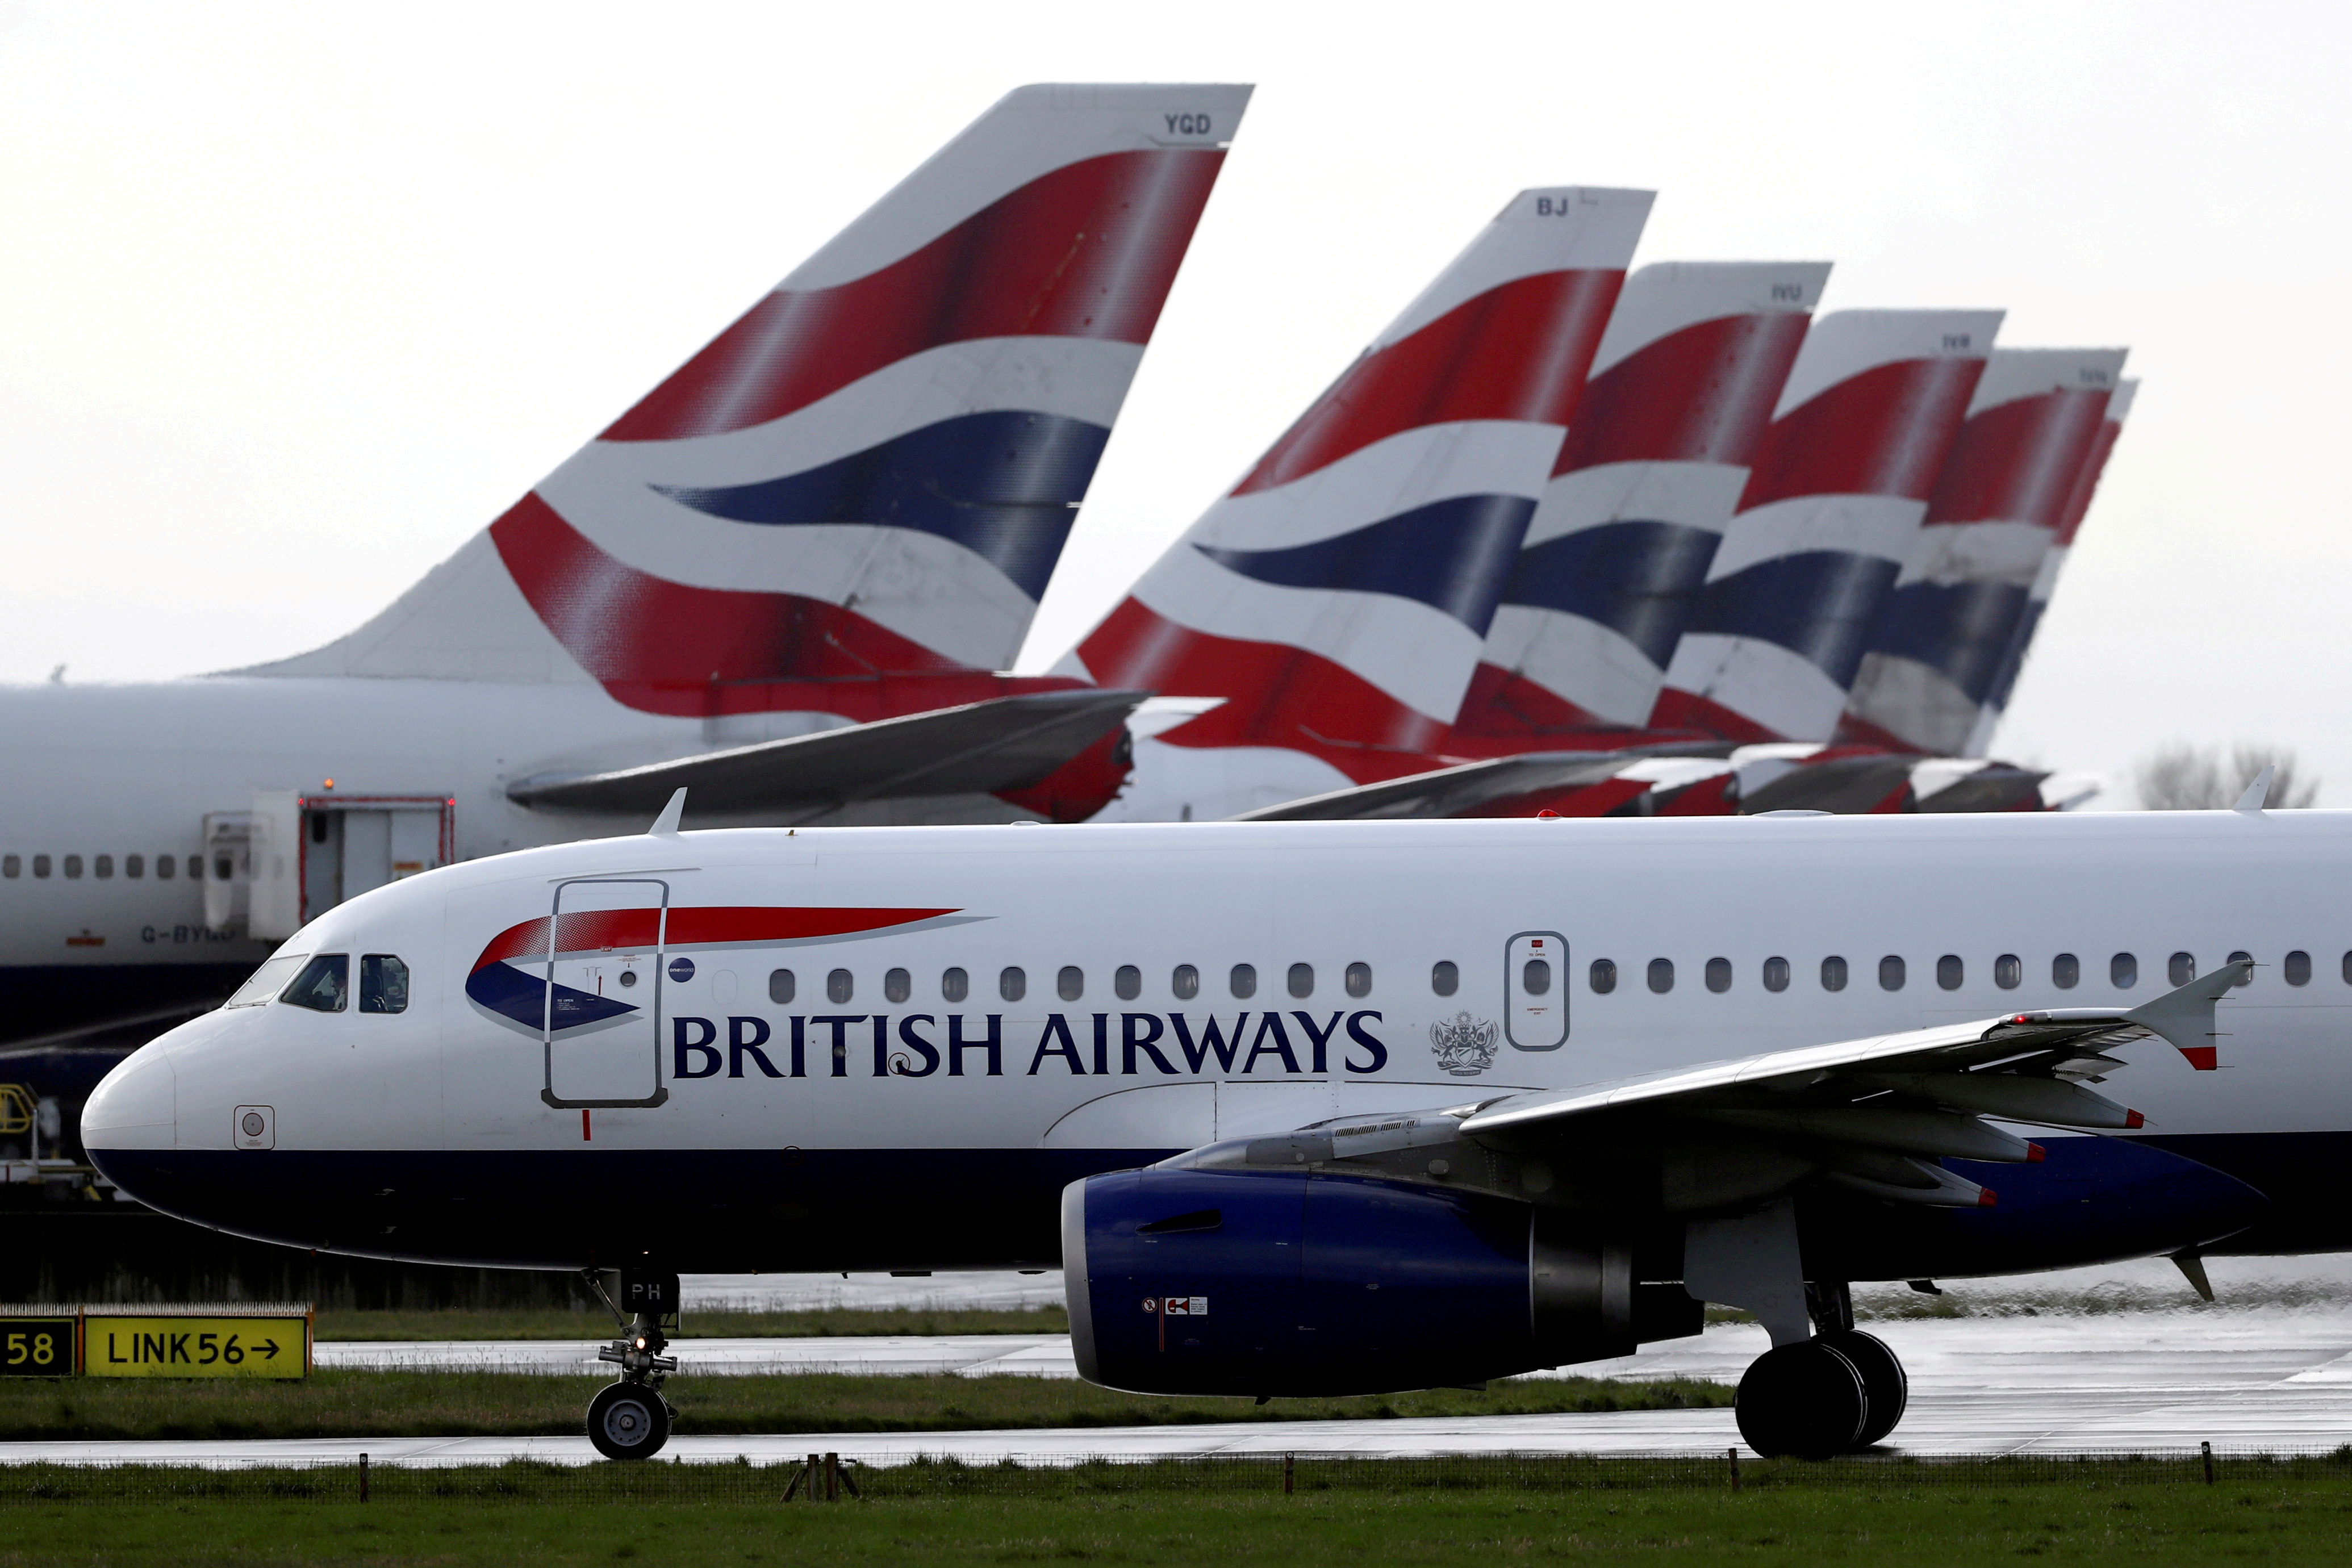 A British Airways plane taxis past tail fins of parked aircraft near Terminal 5 at Heathrow Airport in London, Britain, March 14, 2020. REUTERS/Simon Dawson/File Photo